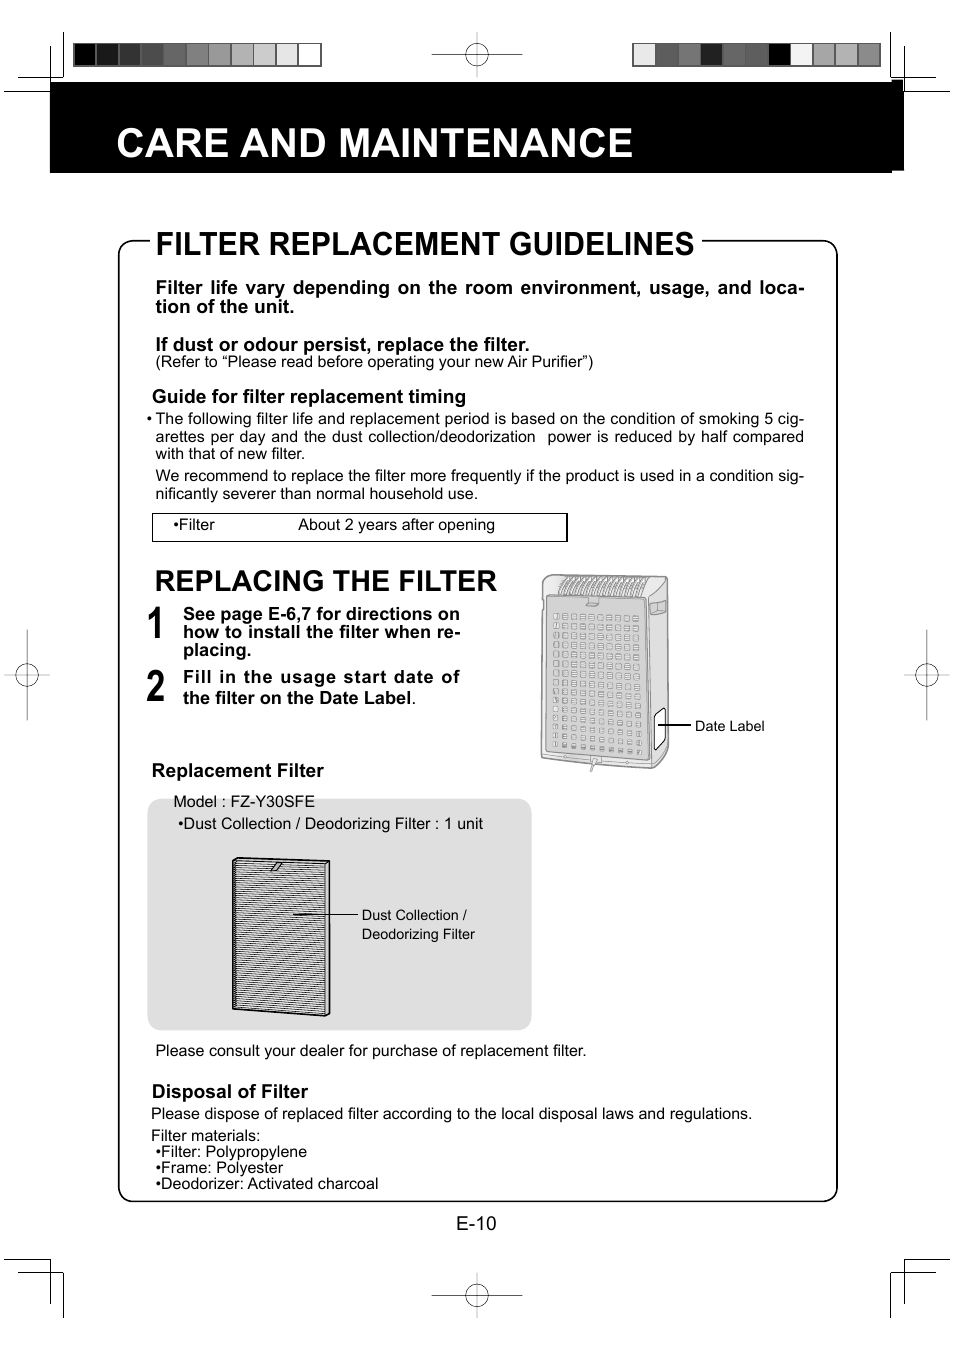 Care and maintenance, Filter replacement guidelines, Replacing the filter | Sharp FU-Y30EU User Manual | Page 12 / 113